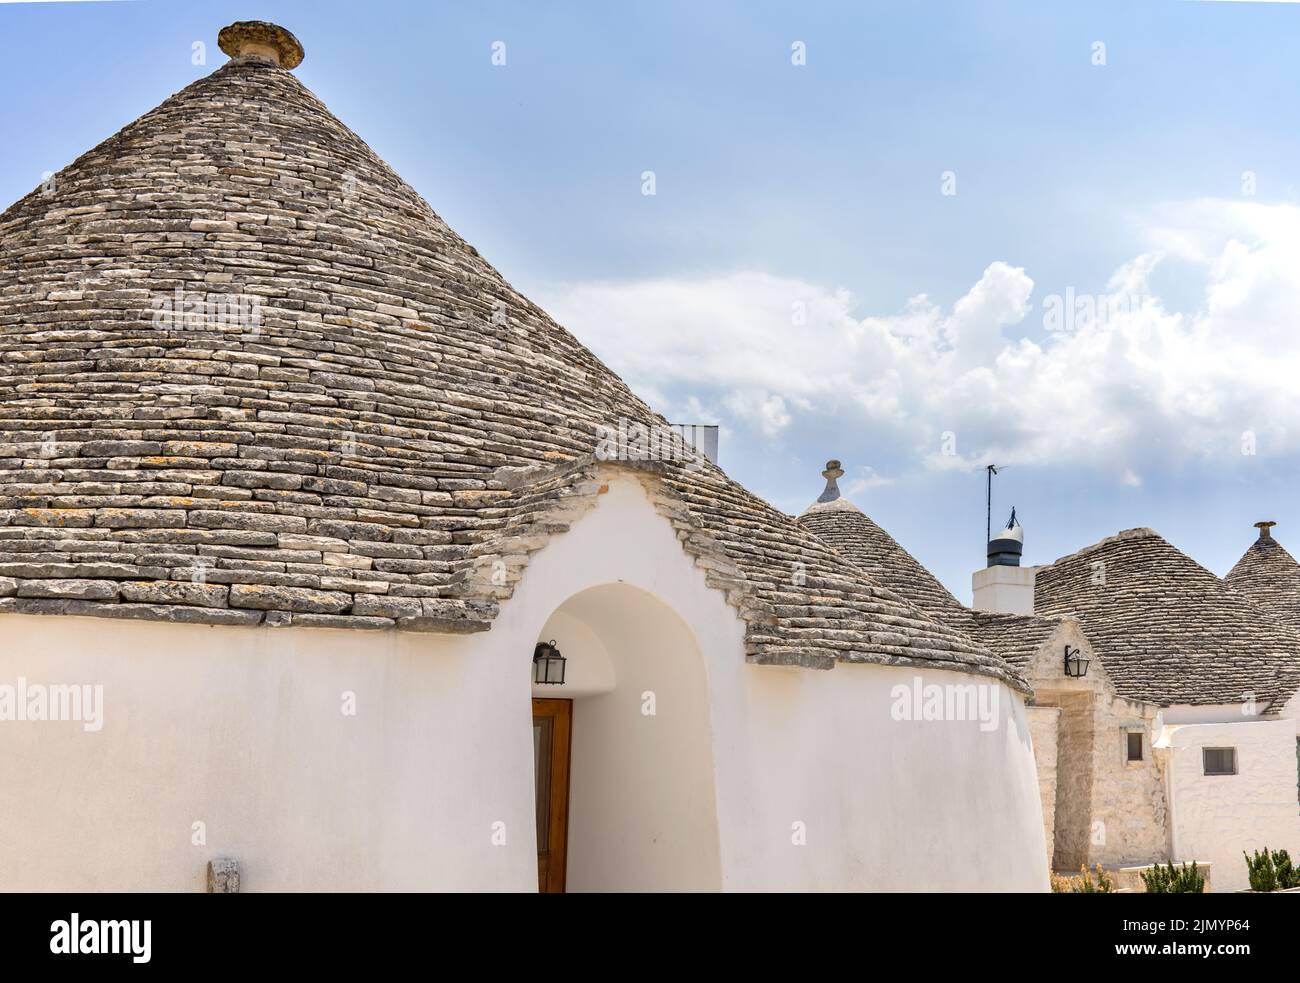 locorotondo a town in puglia italy famous for its circular cone shaped  trulli houses Stock Photo